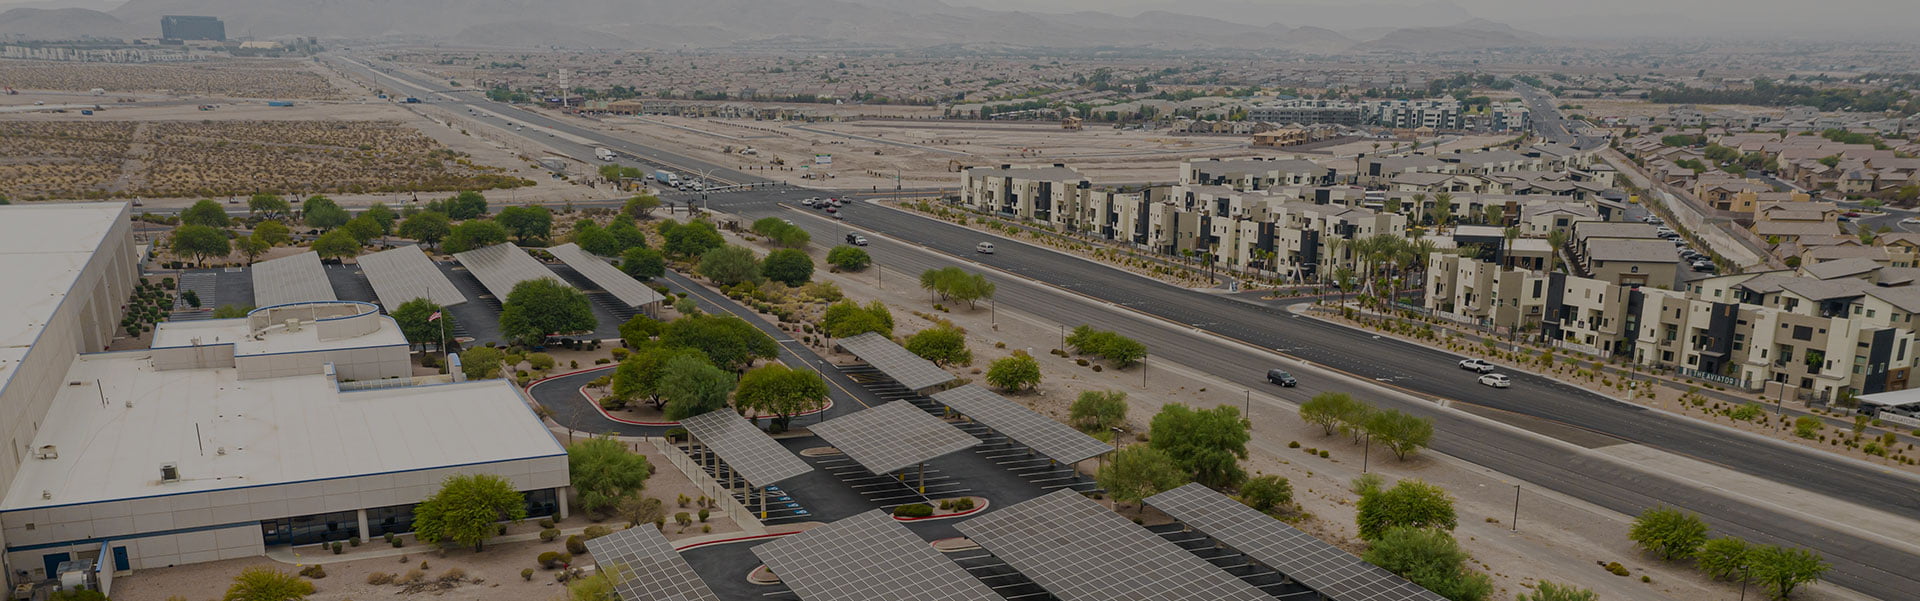 Aerial view of large rooftop solar project